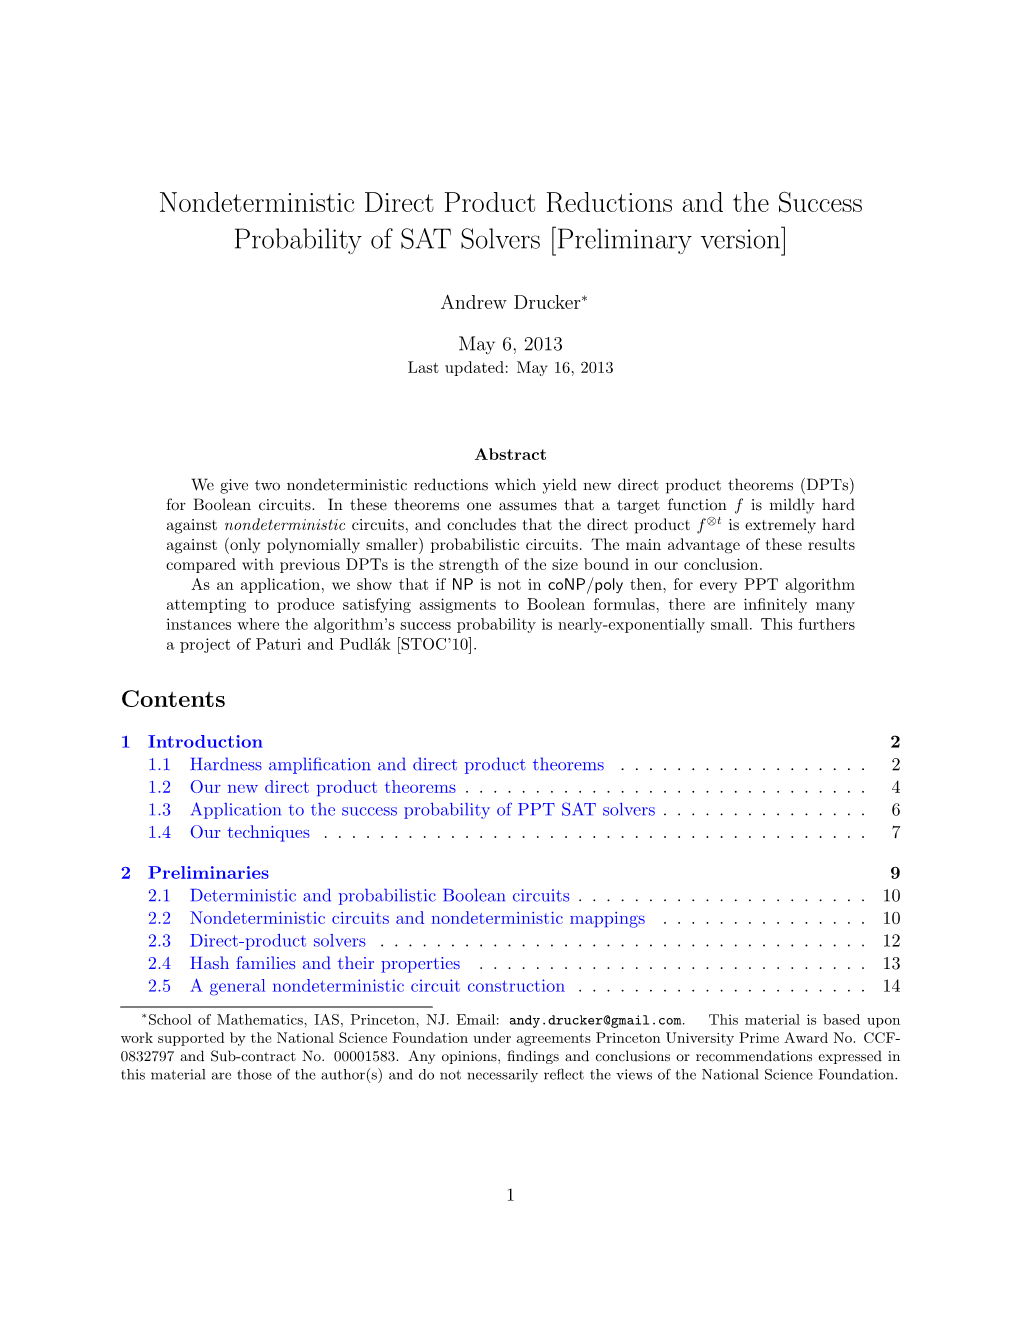 Nondeterministic Direct Product Reducations and the Success